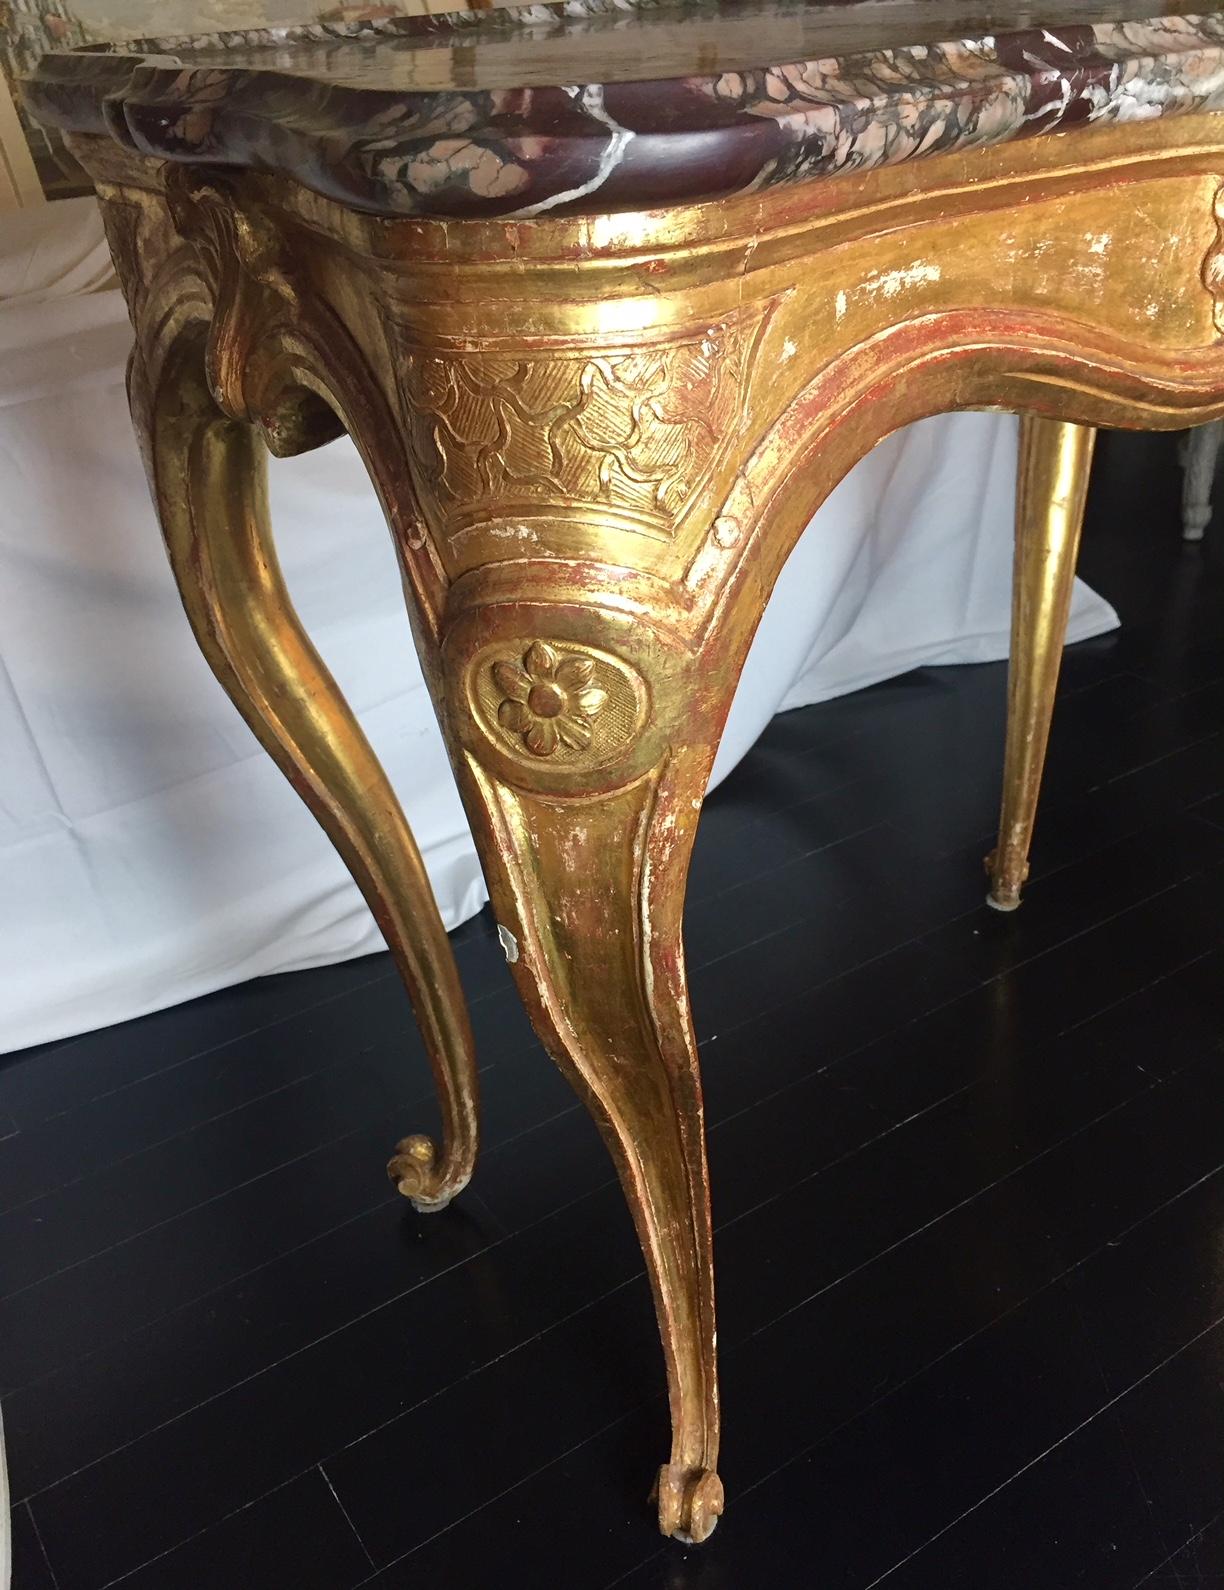 Rare and fine French Louis XV 18th century gilt gesse centre table with beautiful marble tray top. The table has a stylised shell decorated frieze, stands on cabriole legs with further cartouche decoration and terminates in perfectly curved feet.